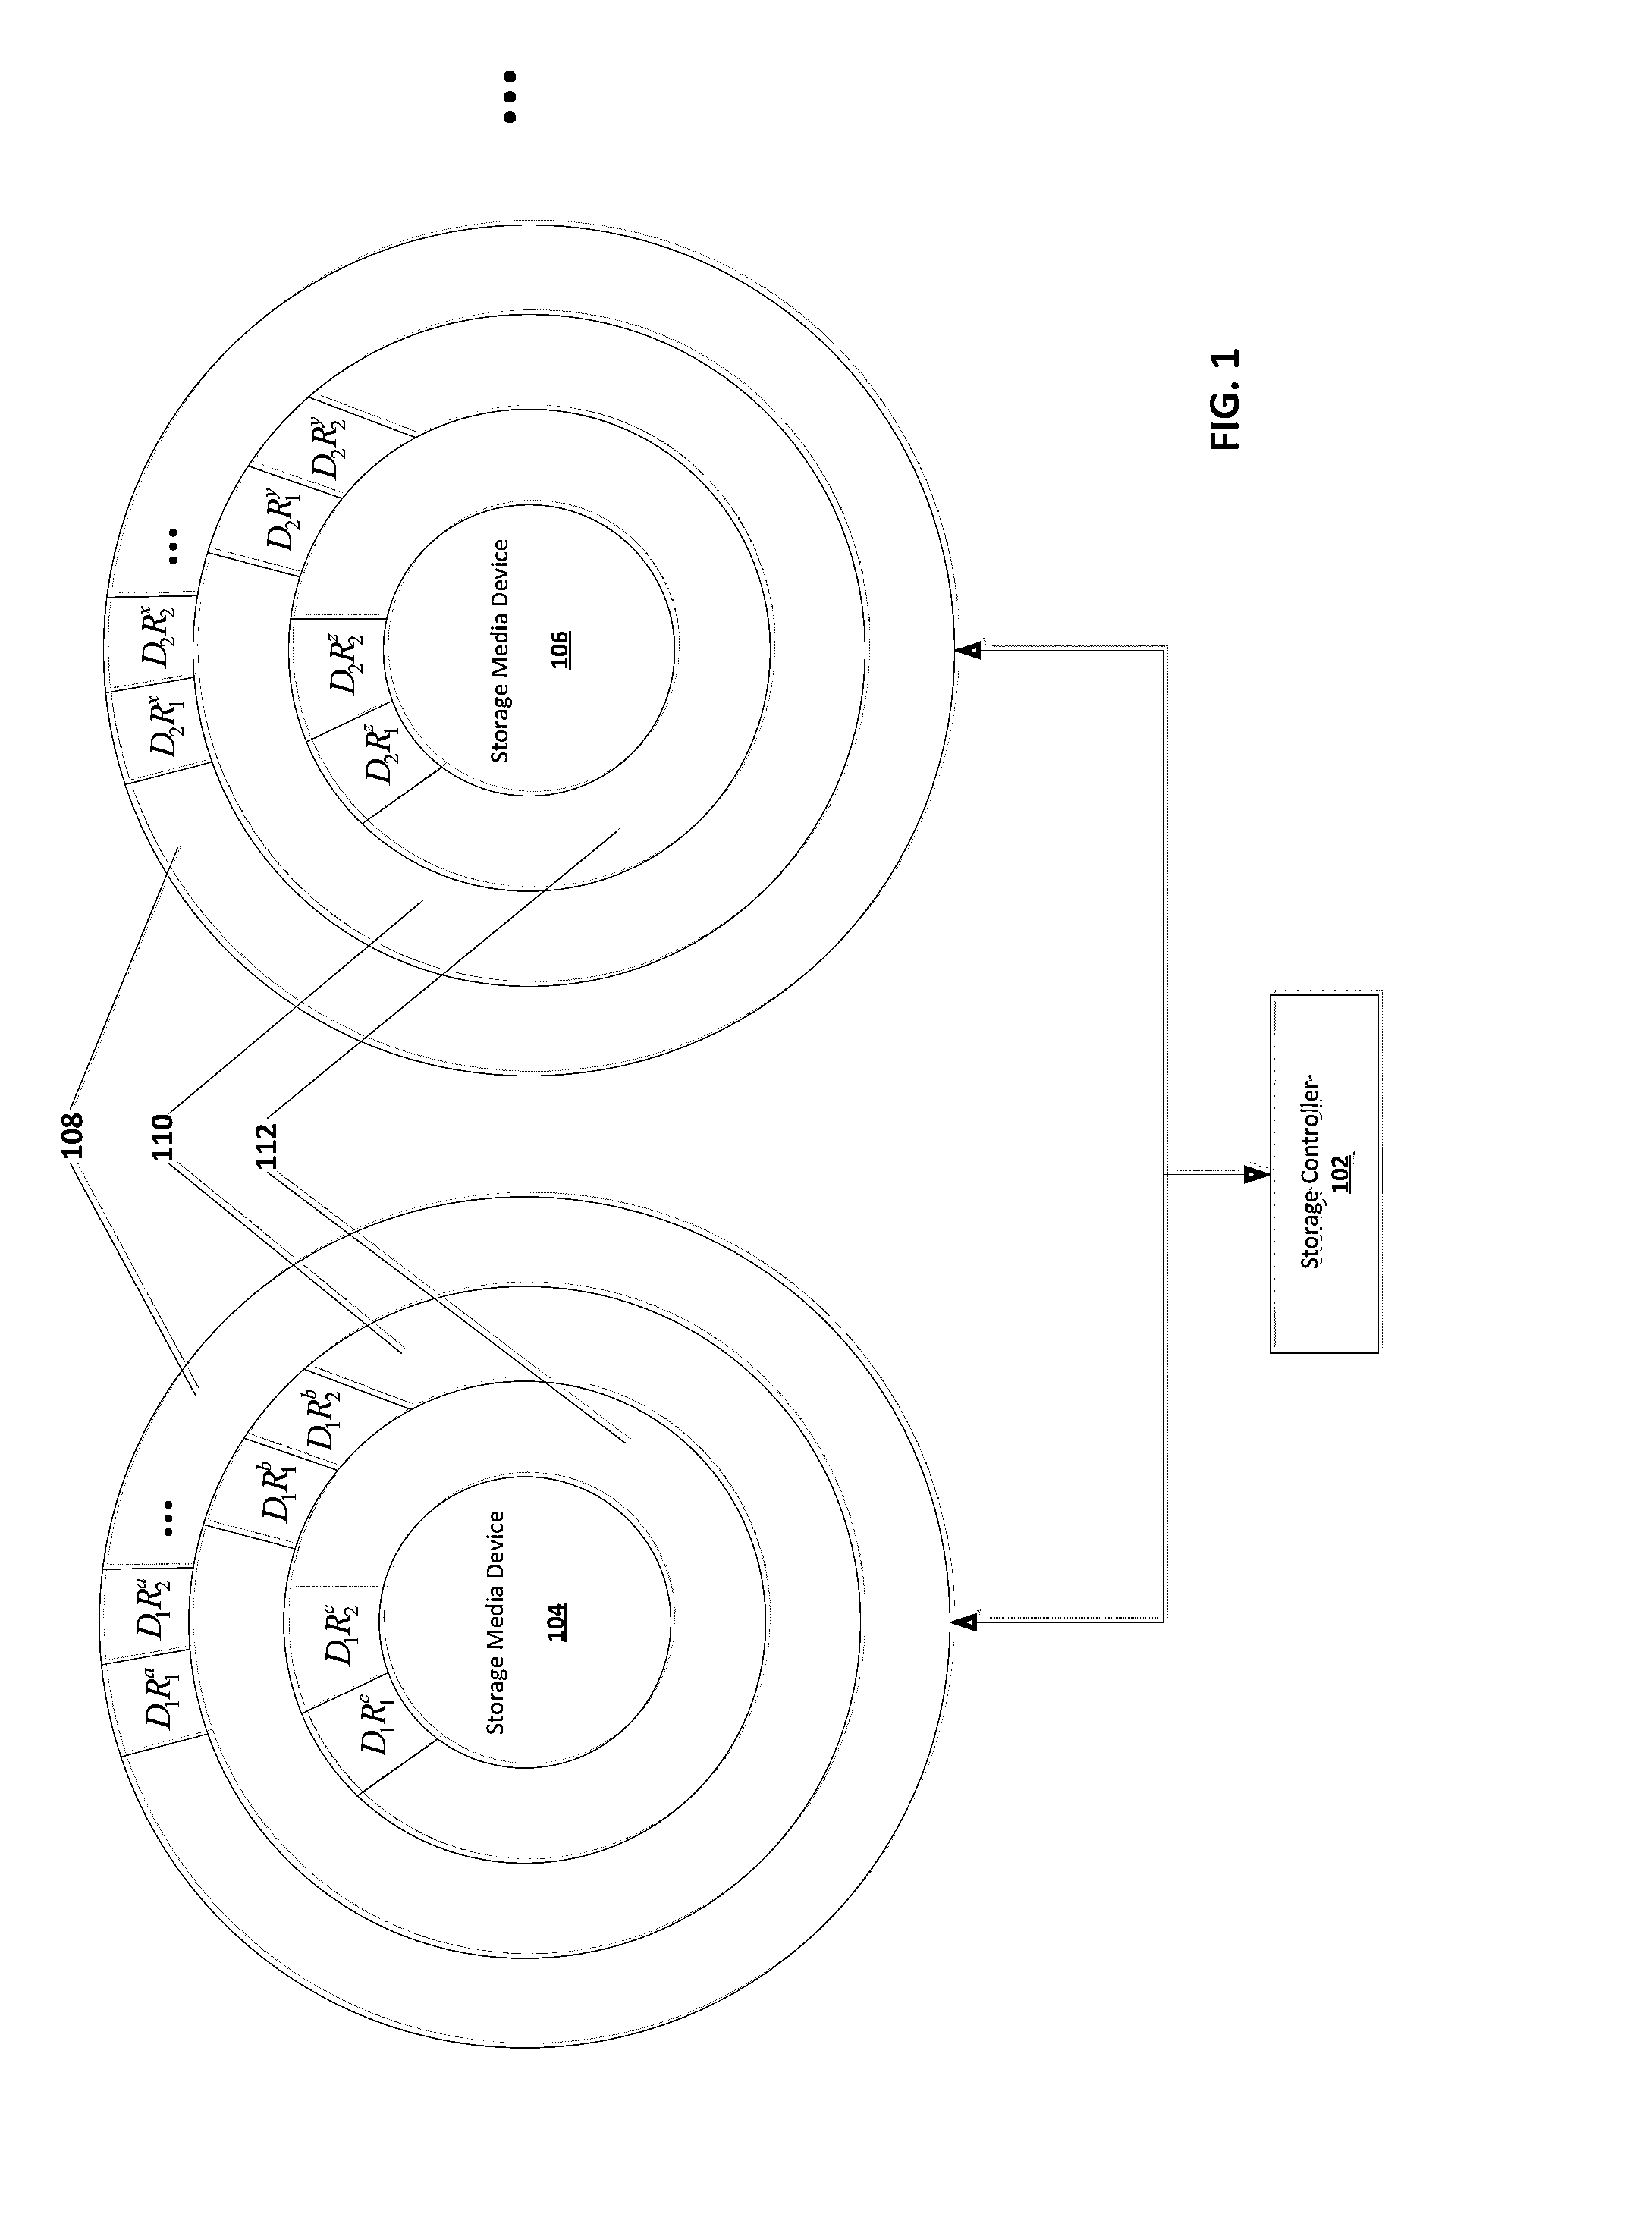 System and method for dynamically load balancing storage media devices based on an optimal sustained performance level